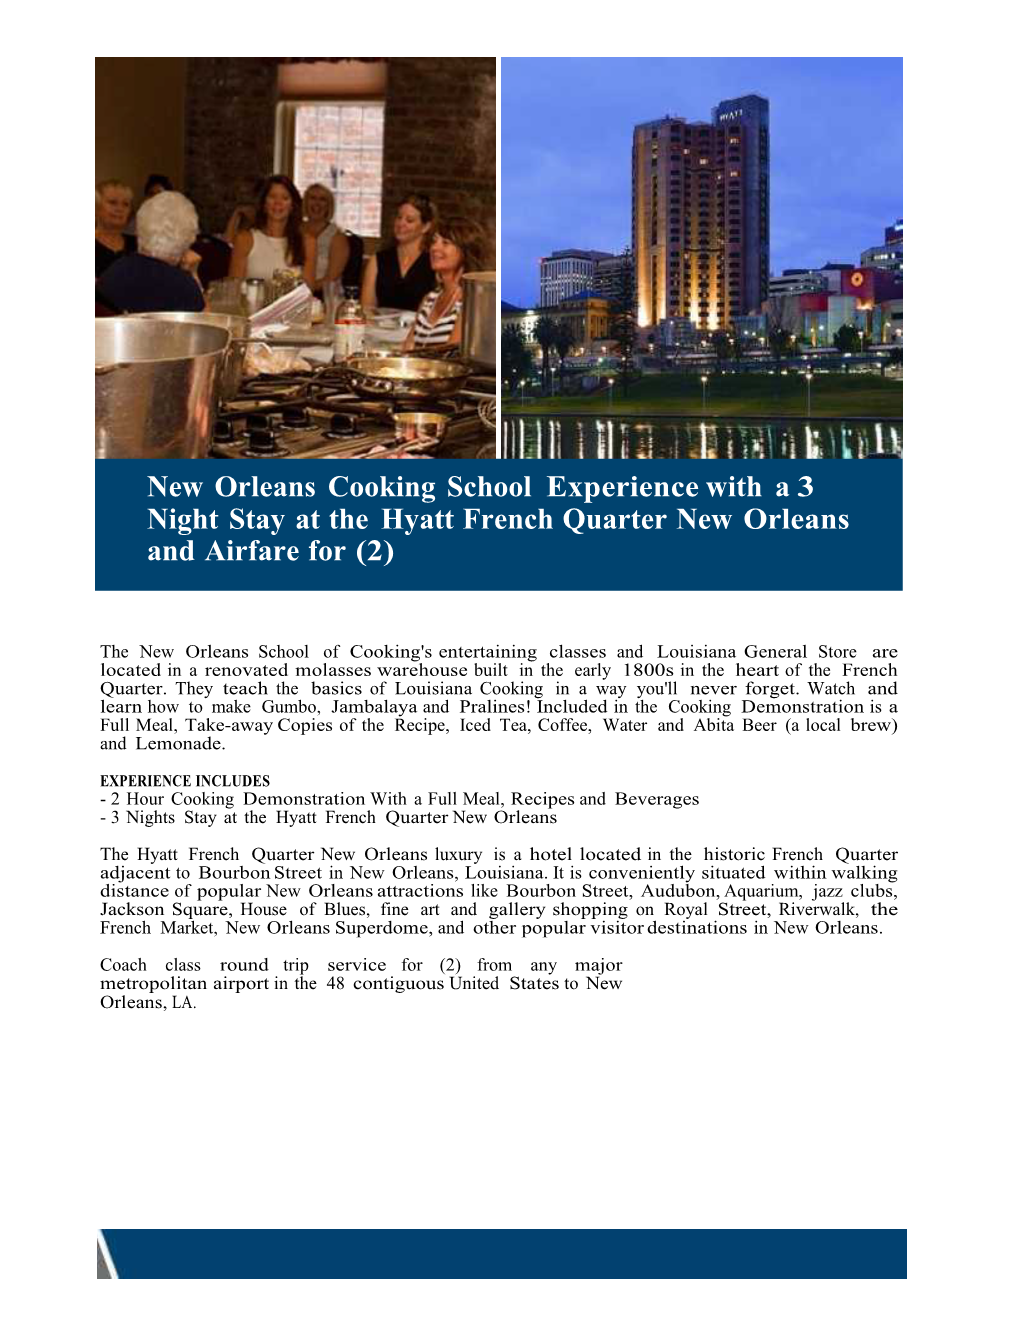 New Orleans Cooking School Experience with a 3 Night Stay at the Hyatt French Quarter New Orleans and Airfare for (2)